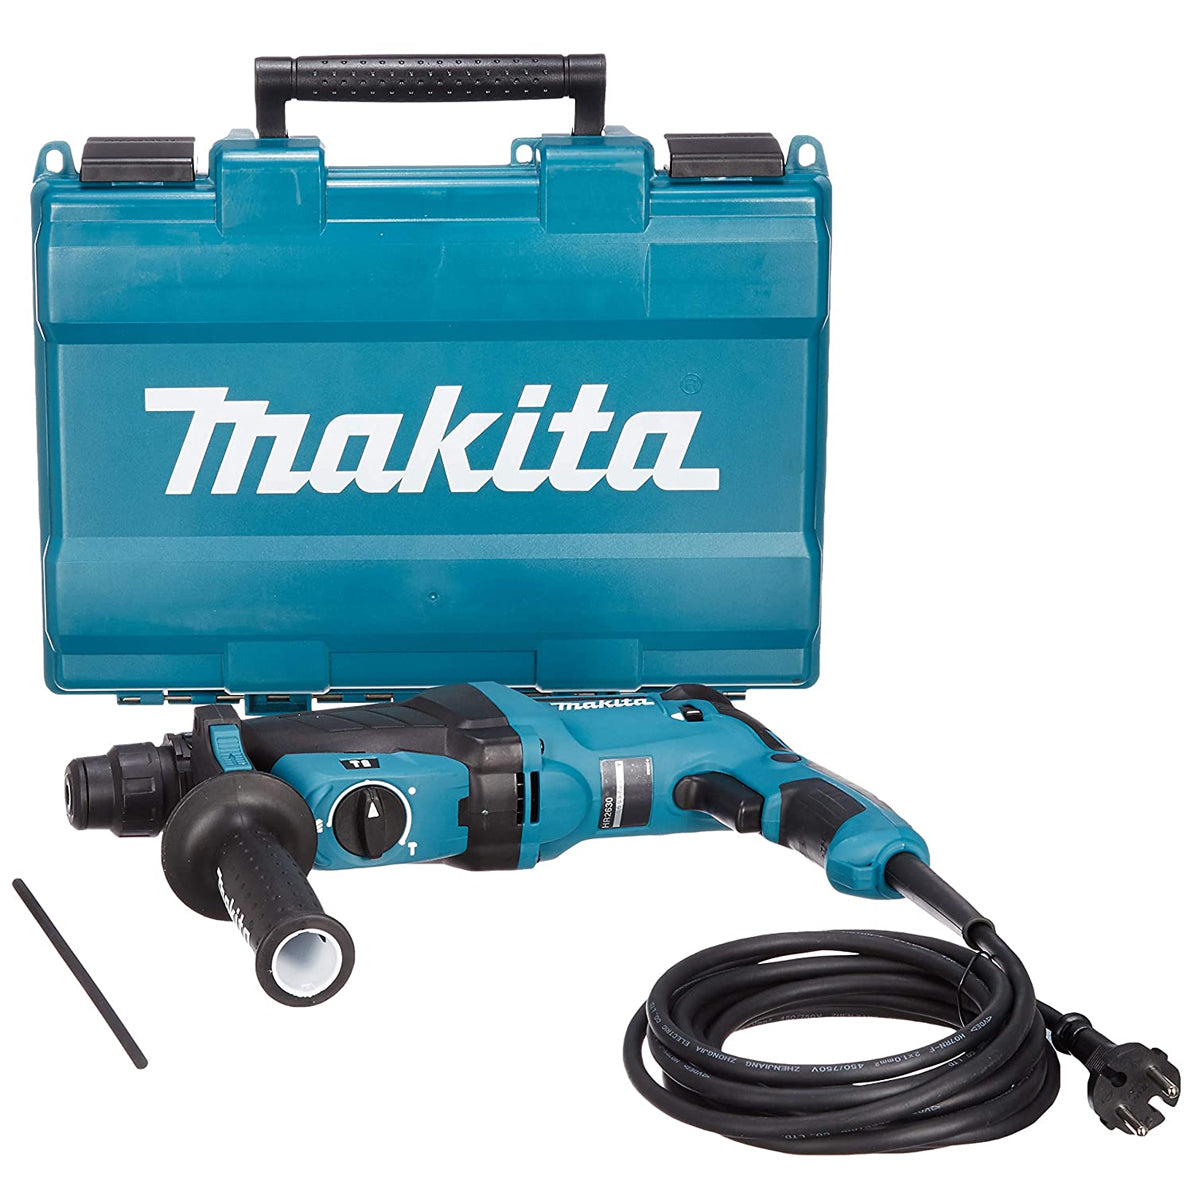 Makita HR2630/1 3 Mode SDS+ Rotary Hammer Drill 110V Replaces HR2610